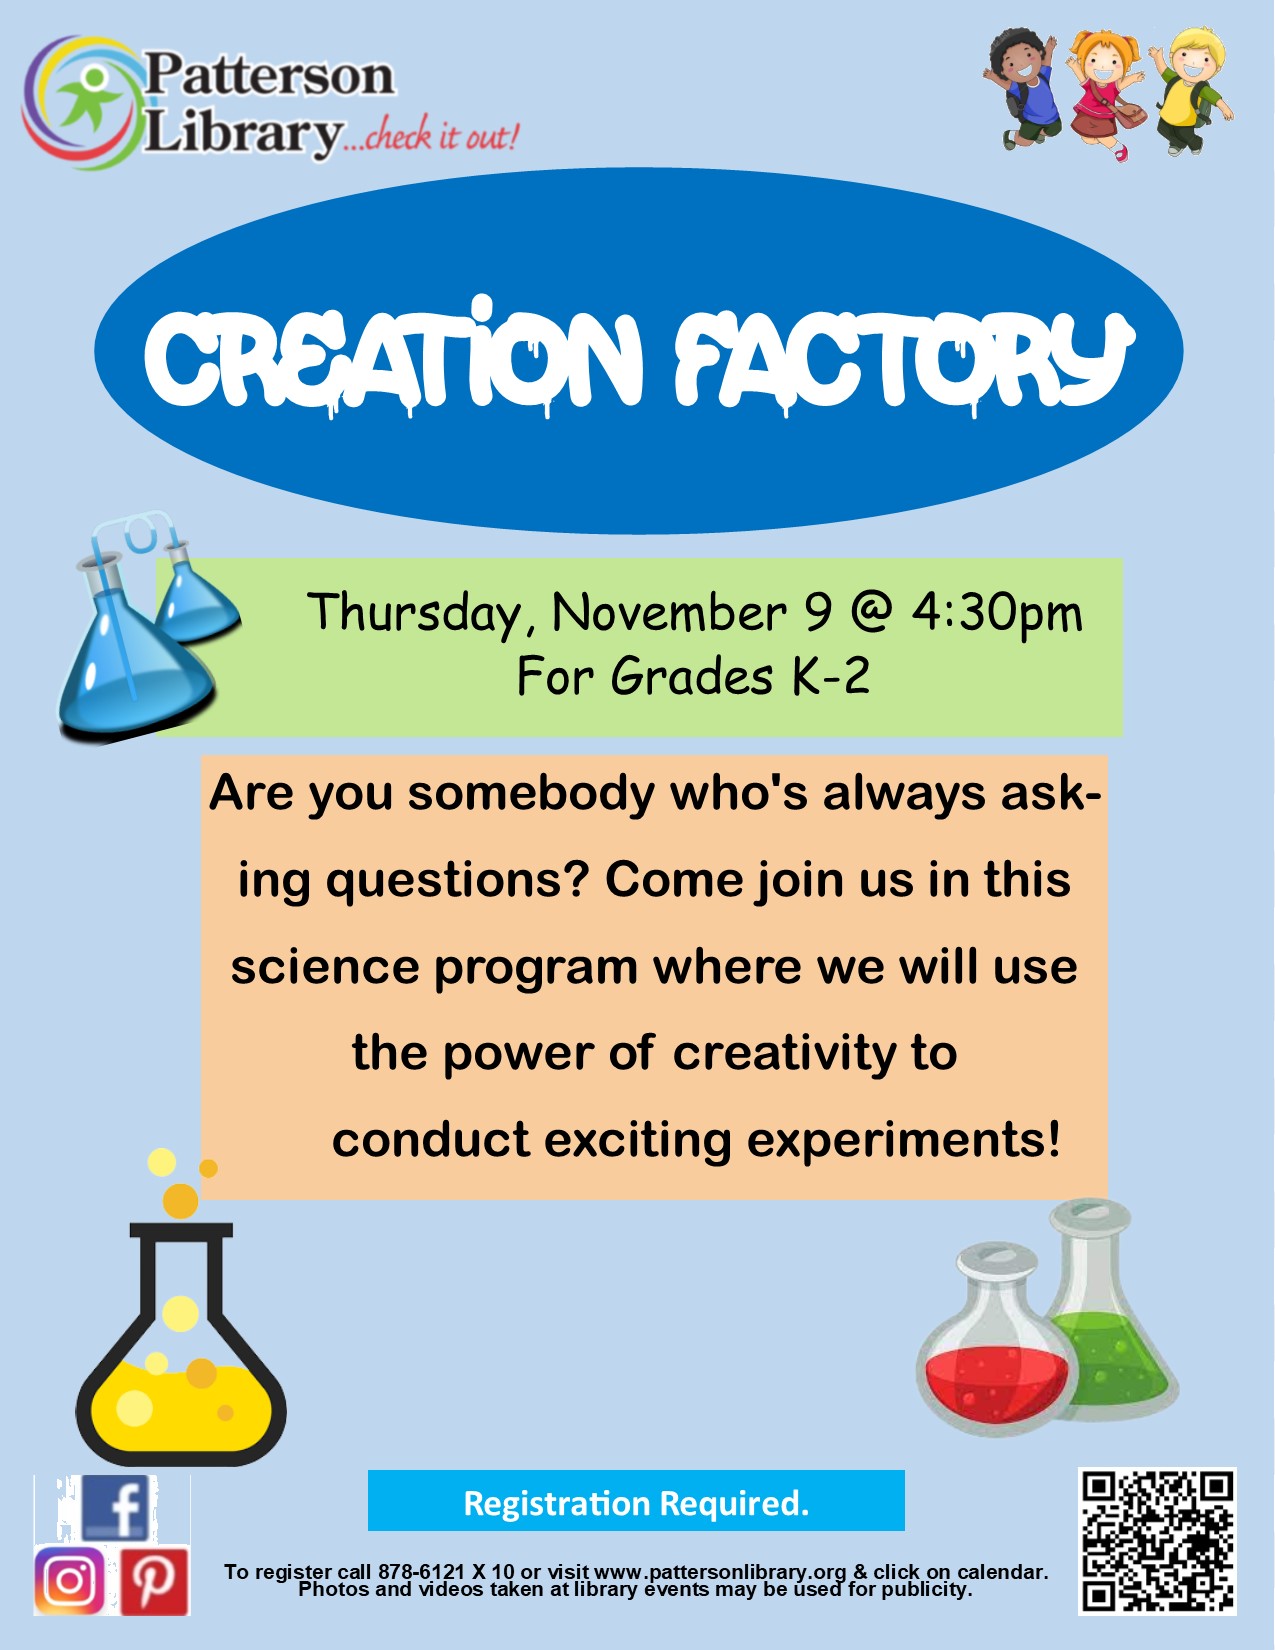 come do some science experiments. 